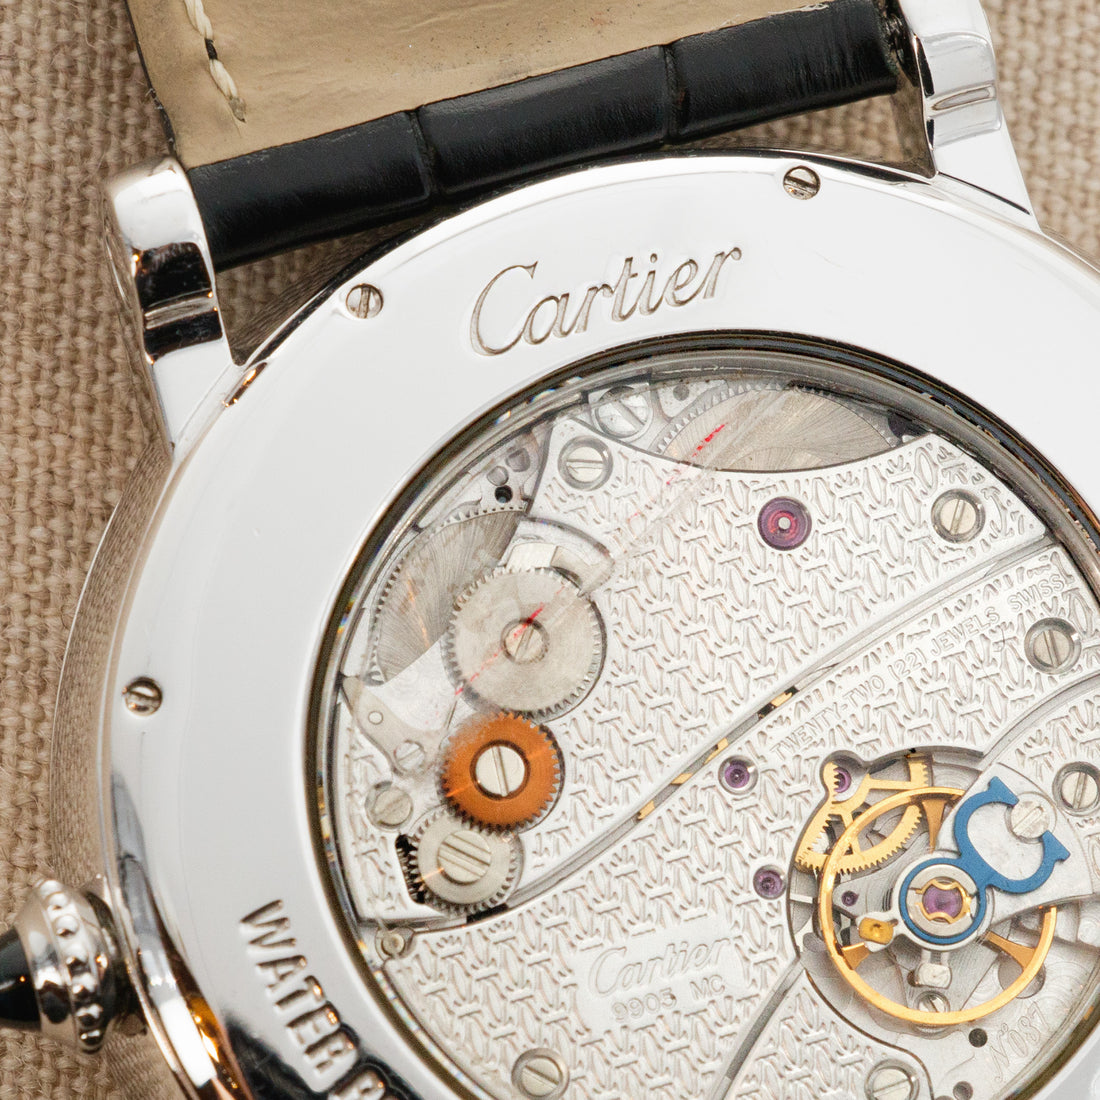 Cartier White Gold Rotonde Jumping Hour Ref. W1553851